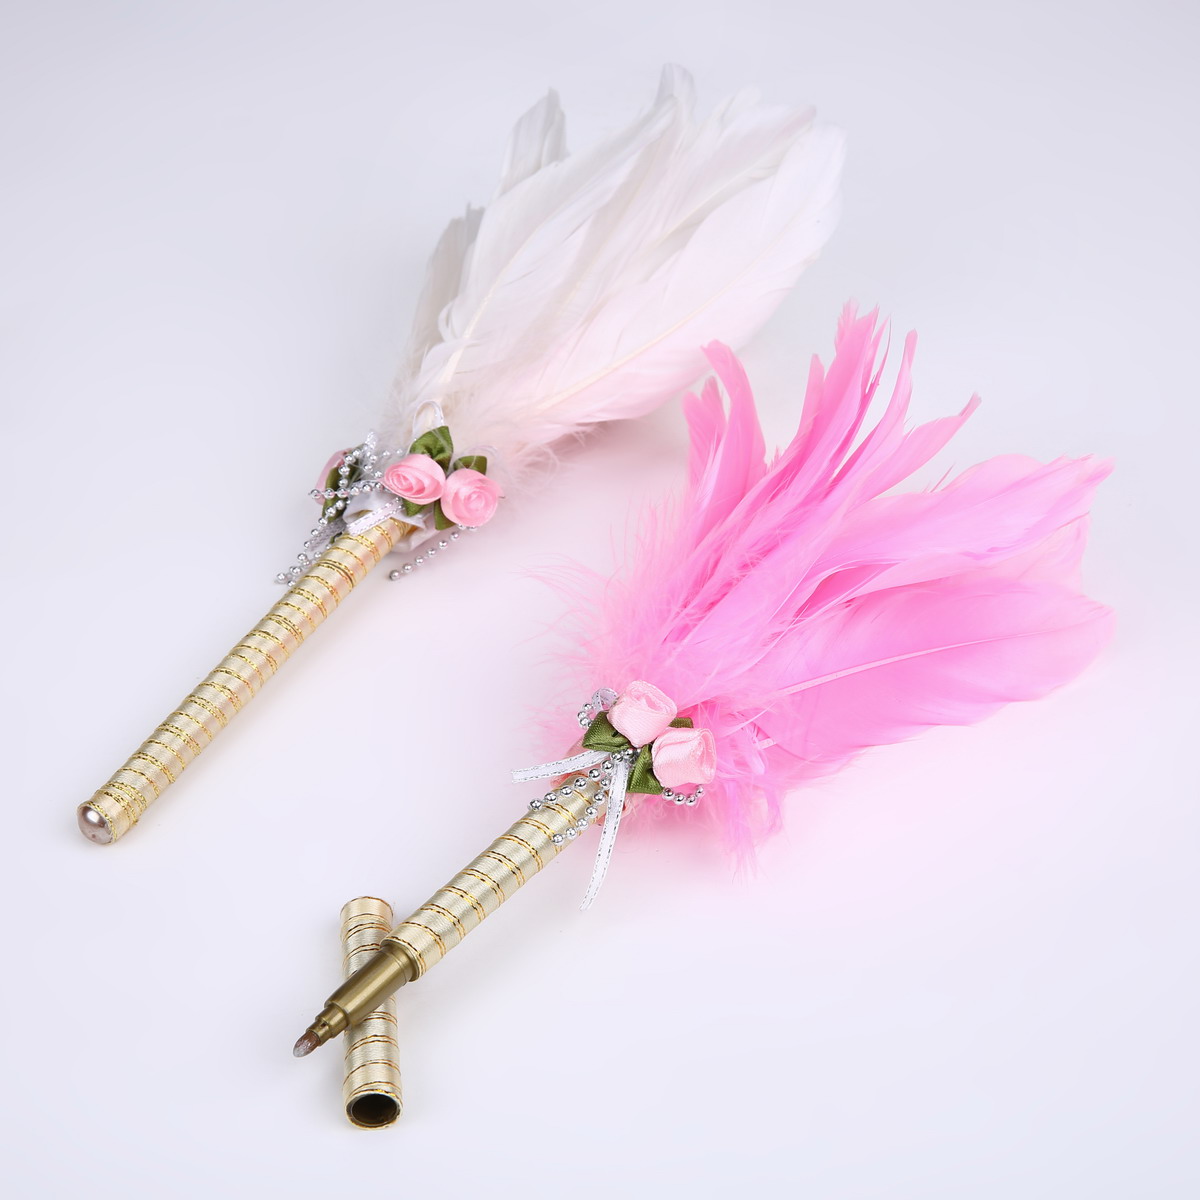 Unique Pink Feathers Top Signature Pen with Elegance Design for Wedding/Advertisement Gift